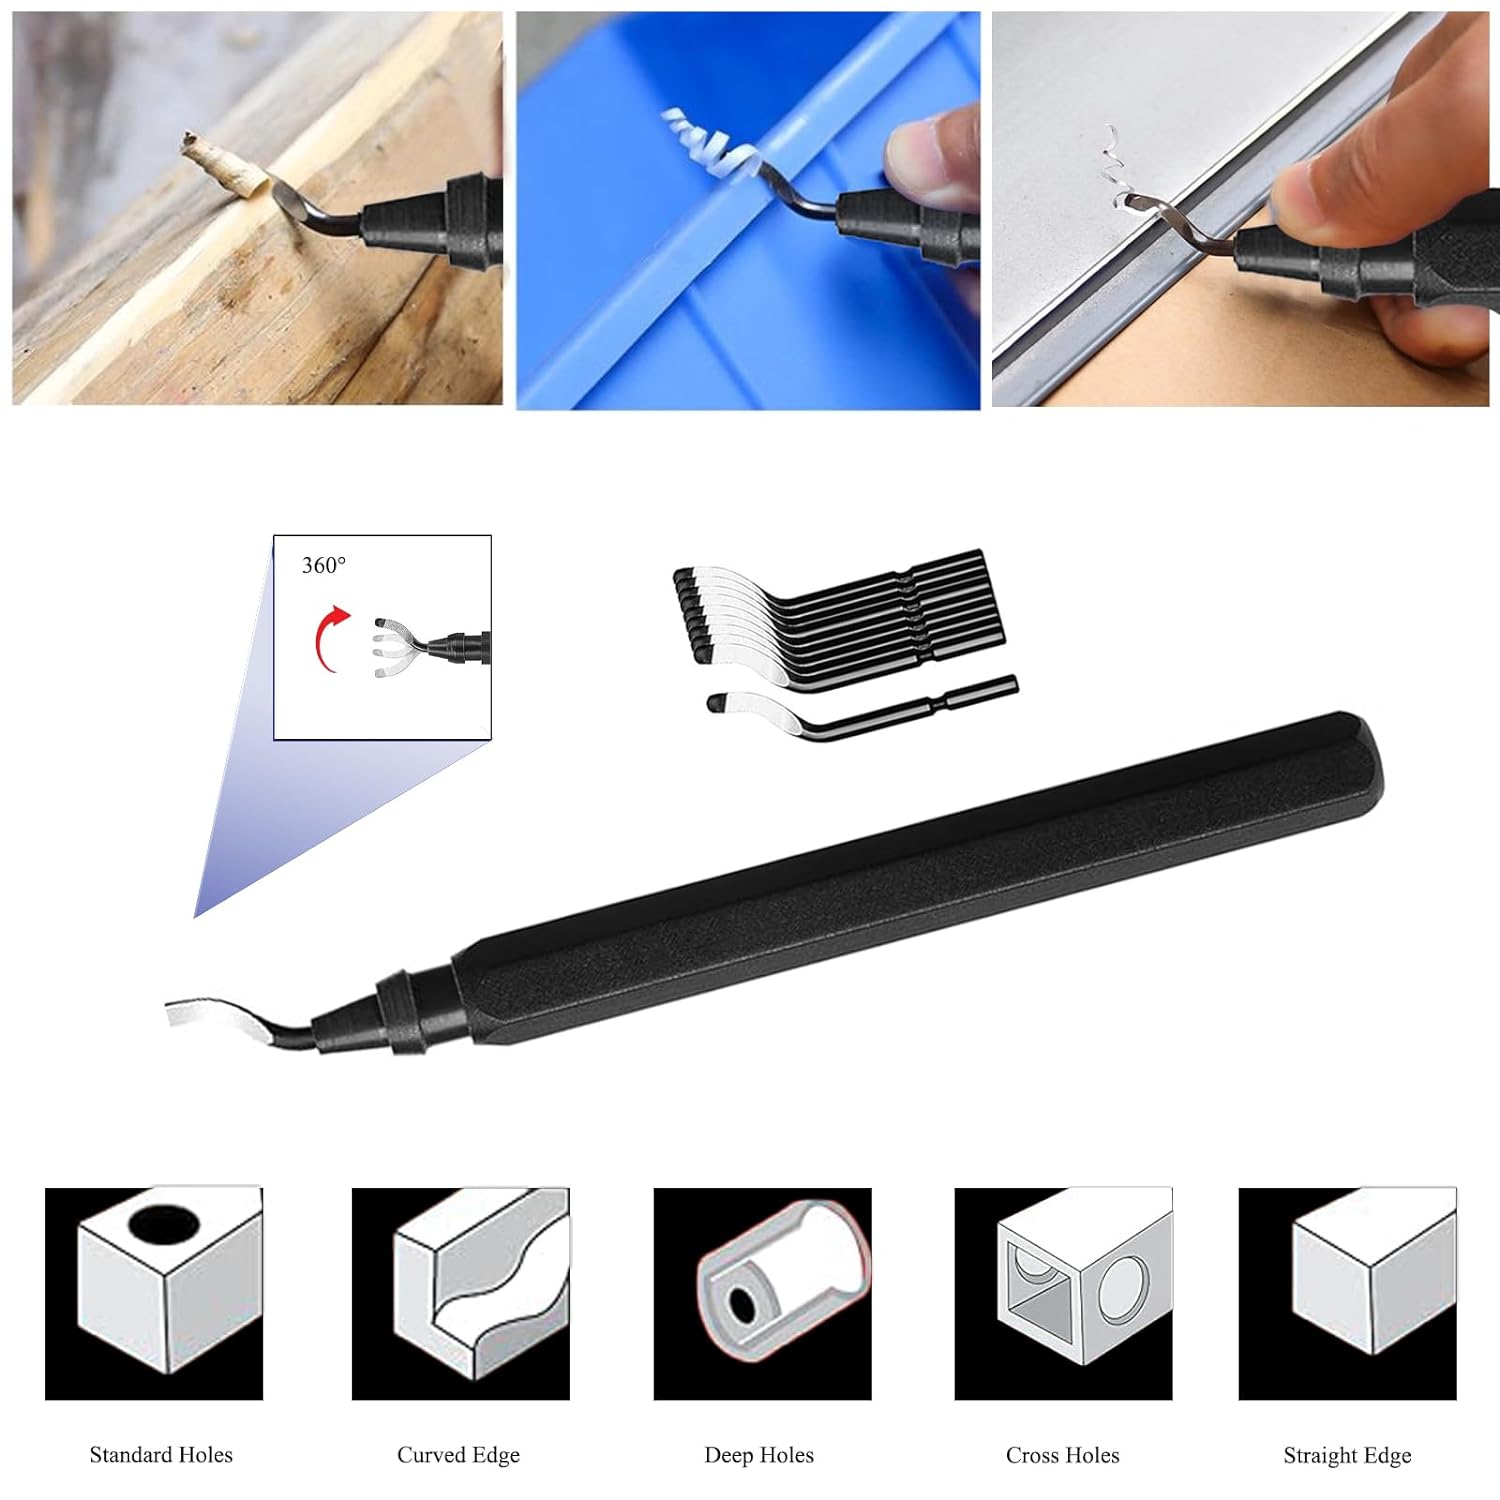 62pcs-3d-printer-tool-kit-3d-printing-accessories-includes-nozzle-cleaning-kit-deburring-tools-removal-tools-needle-file-1 62Pcs 3D Printer Tool Kit Review